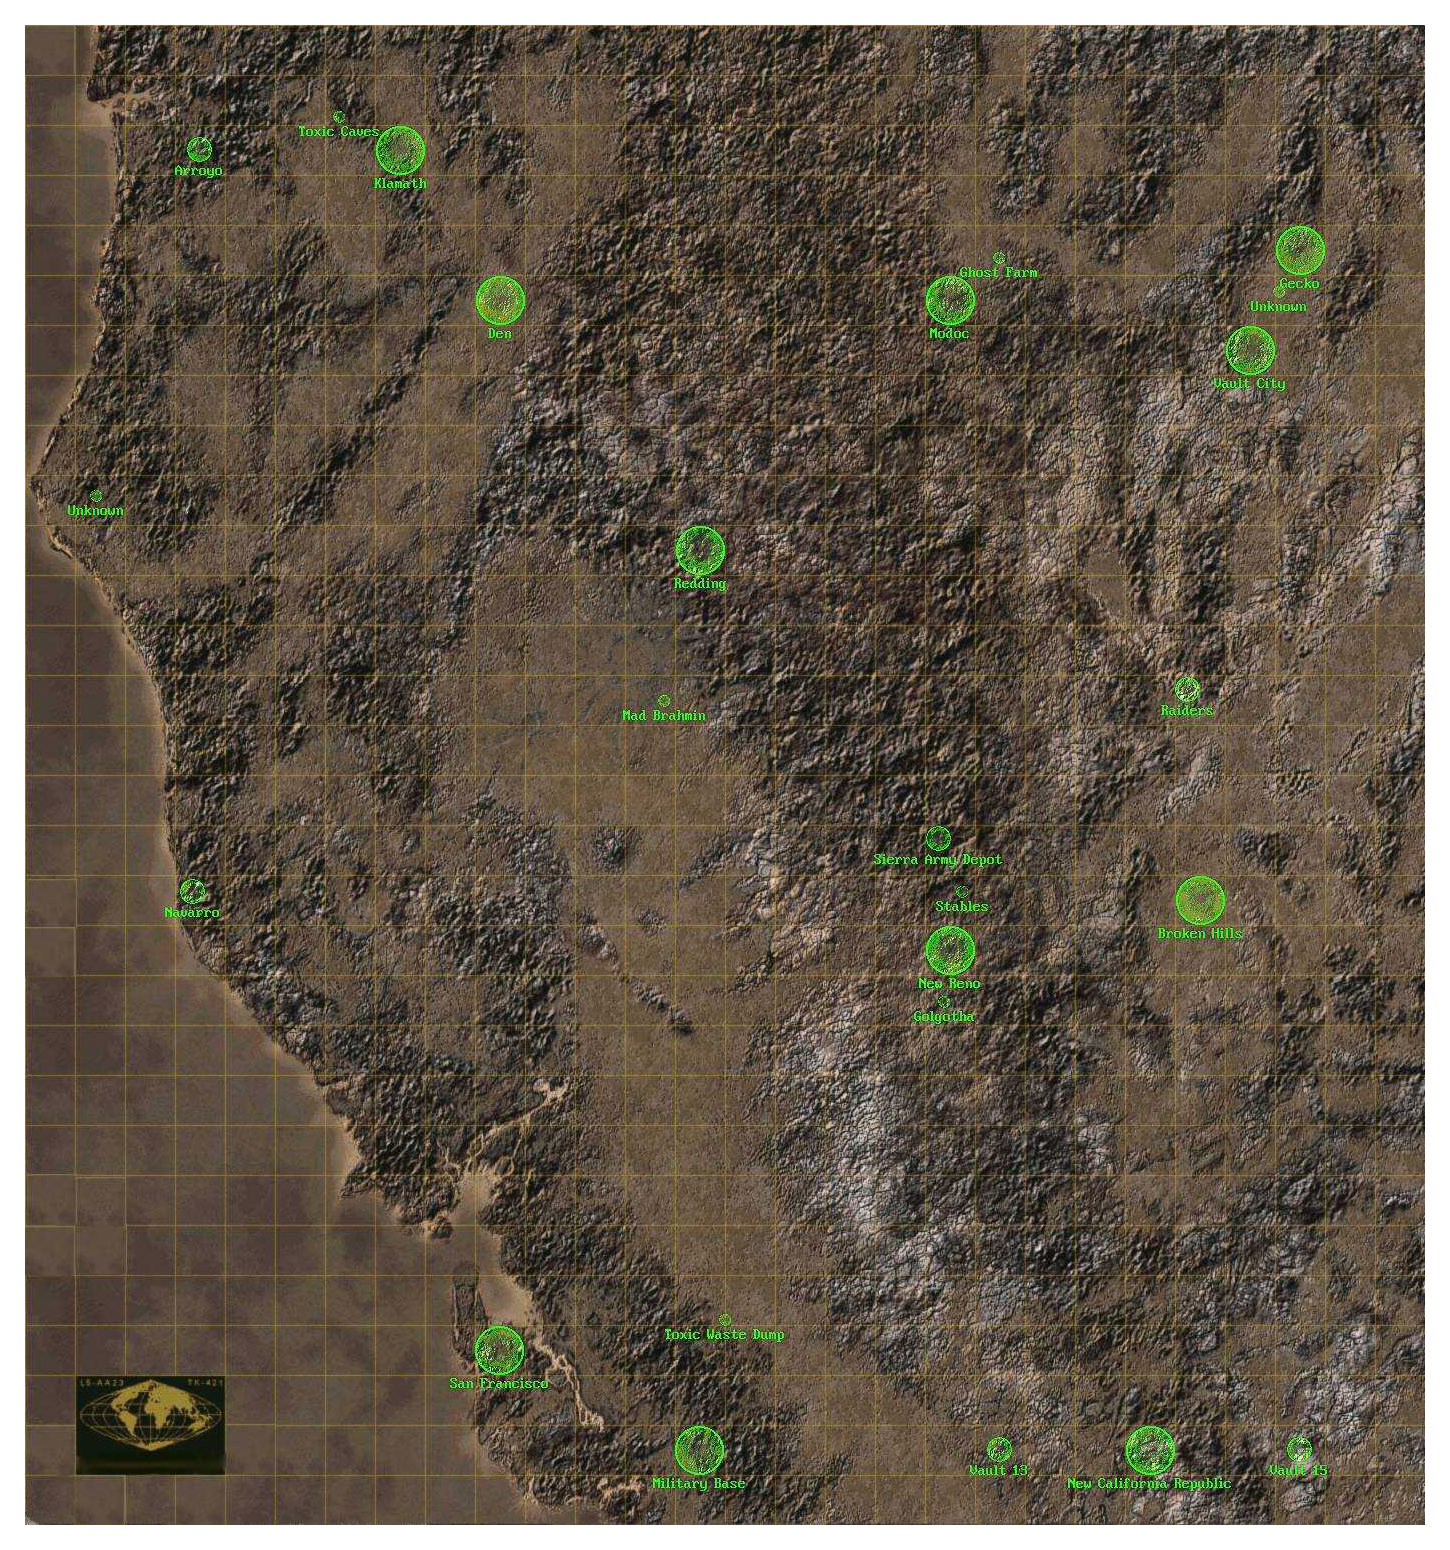 Fallout 3: Maps of the world - Main maps